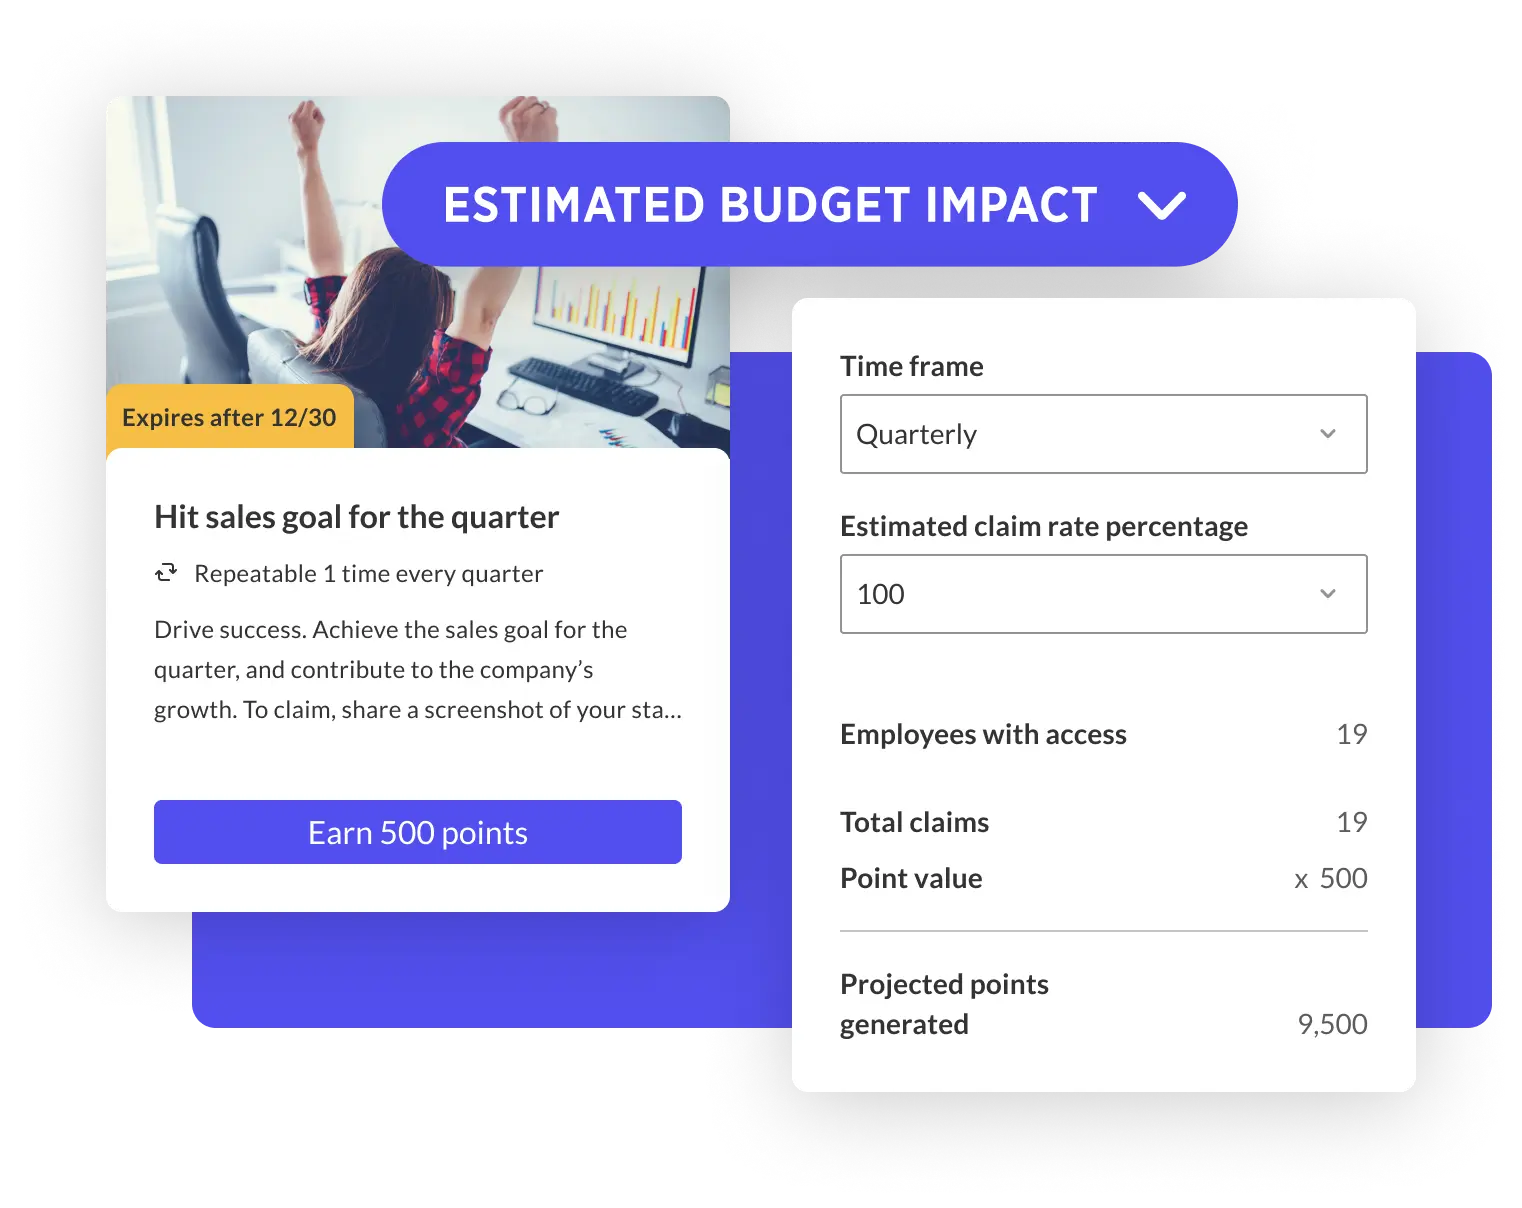 Screenshot from WorkTango platform of a tool that estimates budget impact for Employee Incentives.